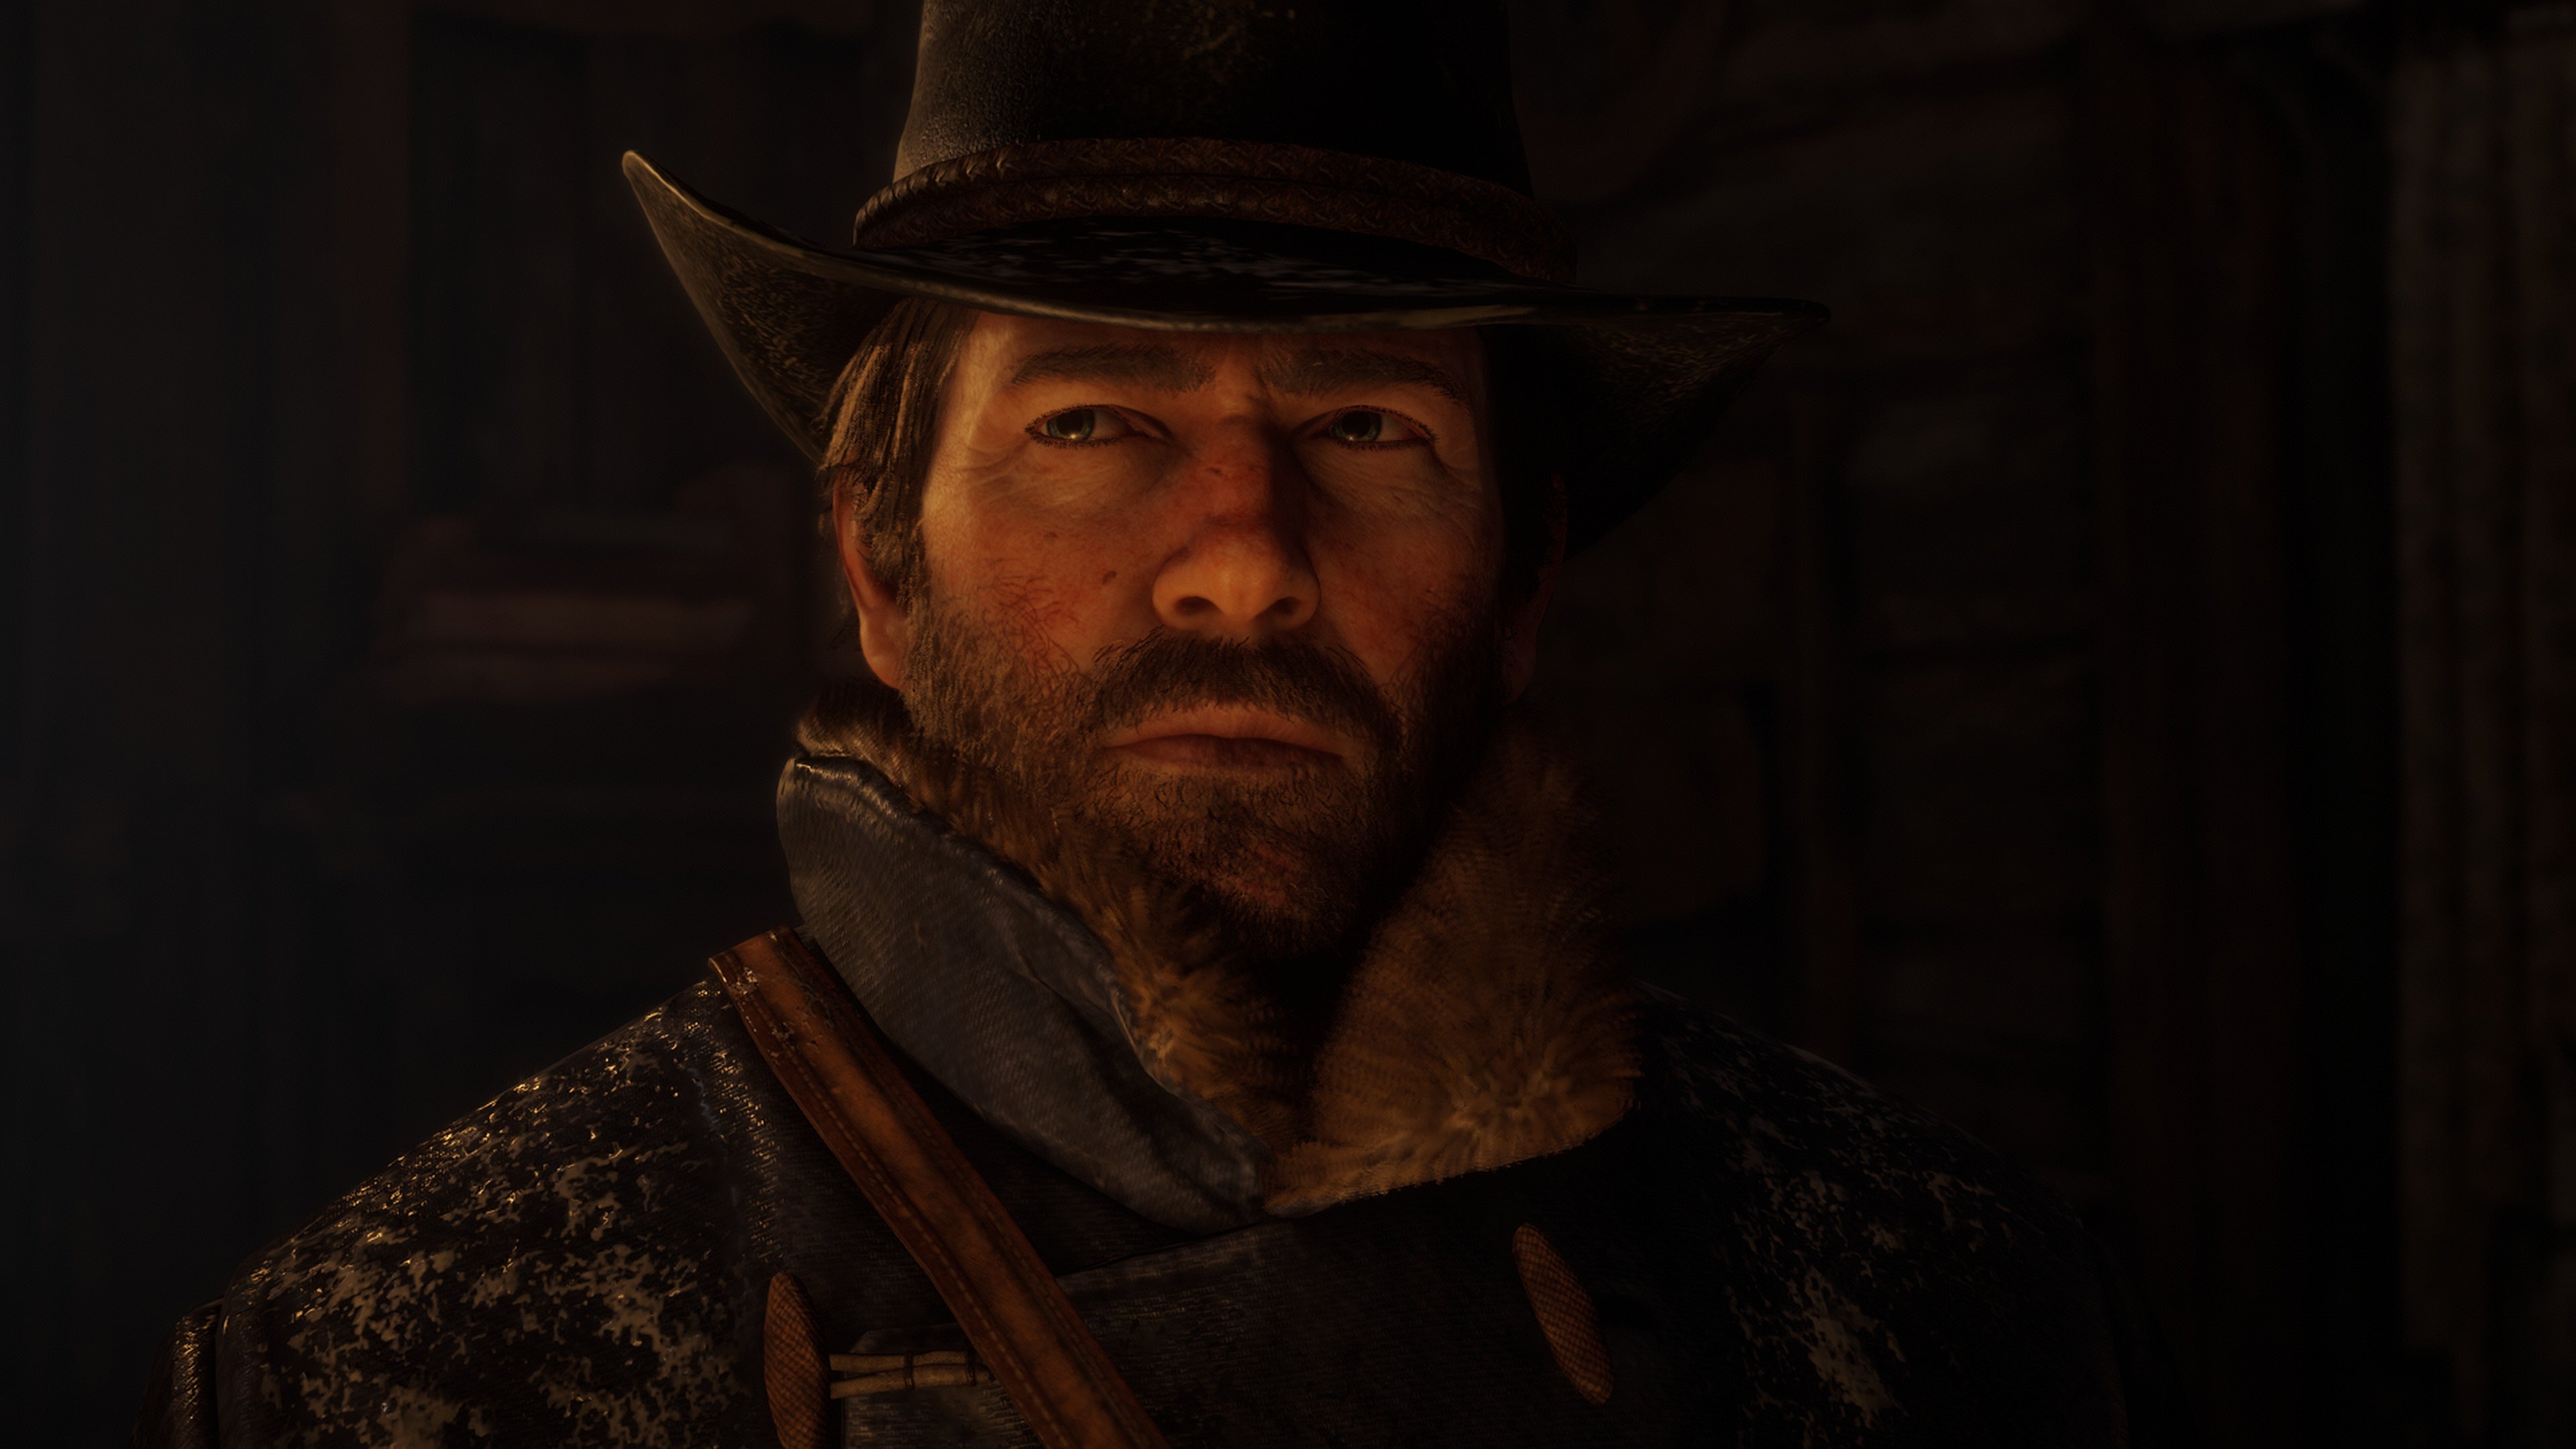 Image for Red Dead Redemption 2 has shipped over 23 million units